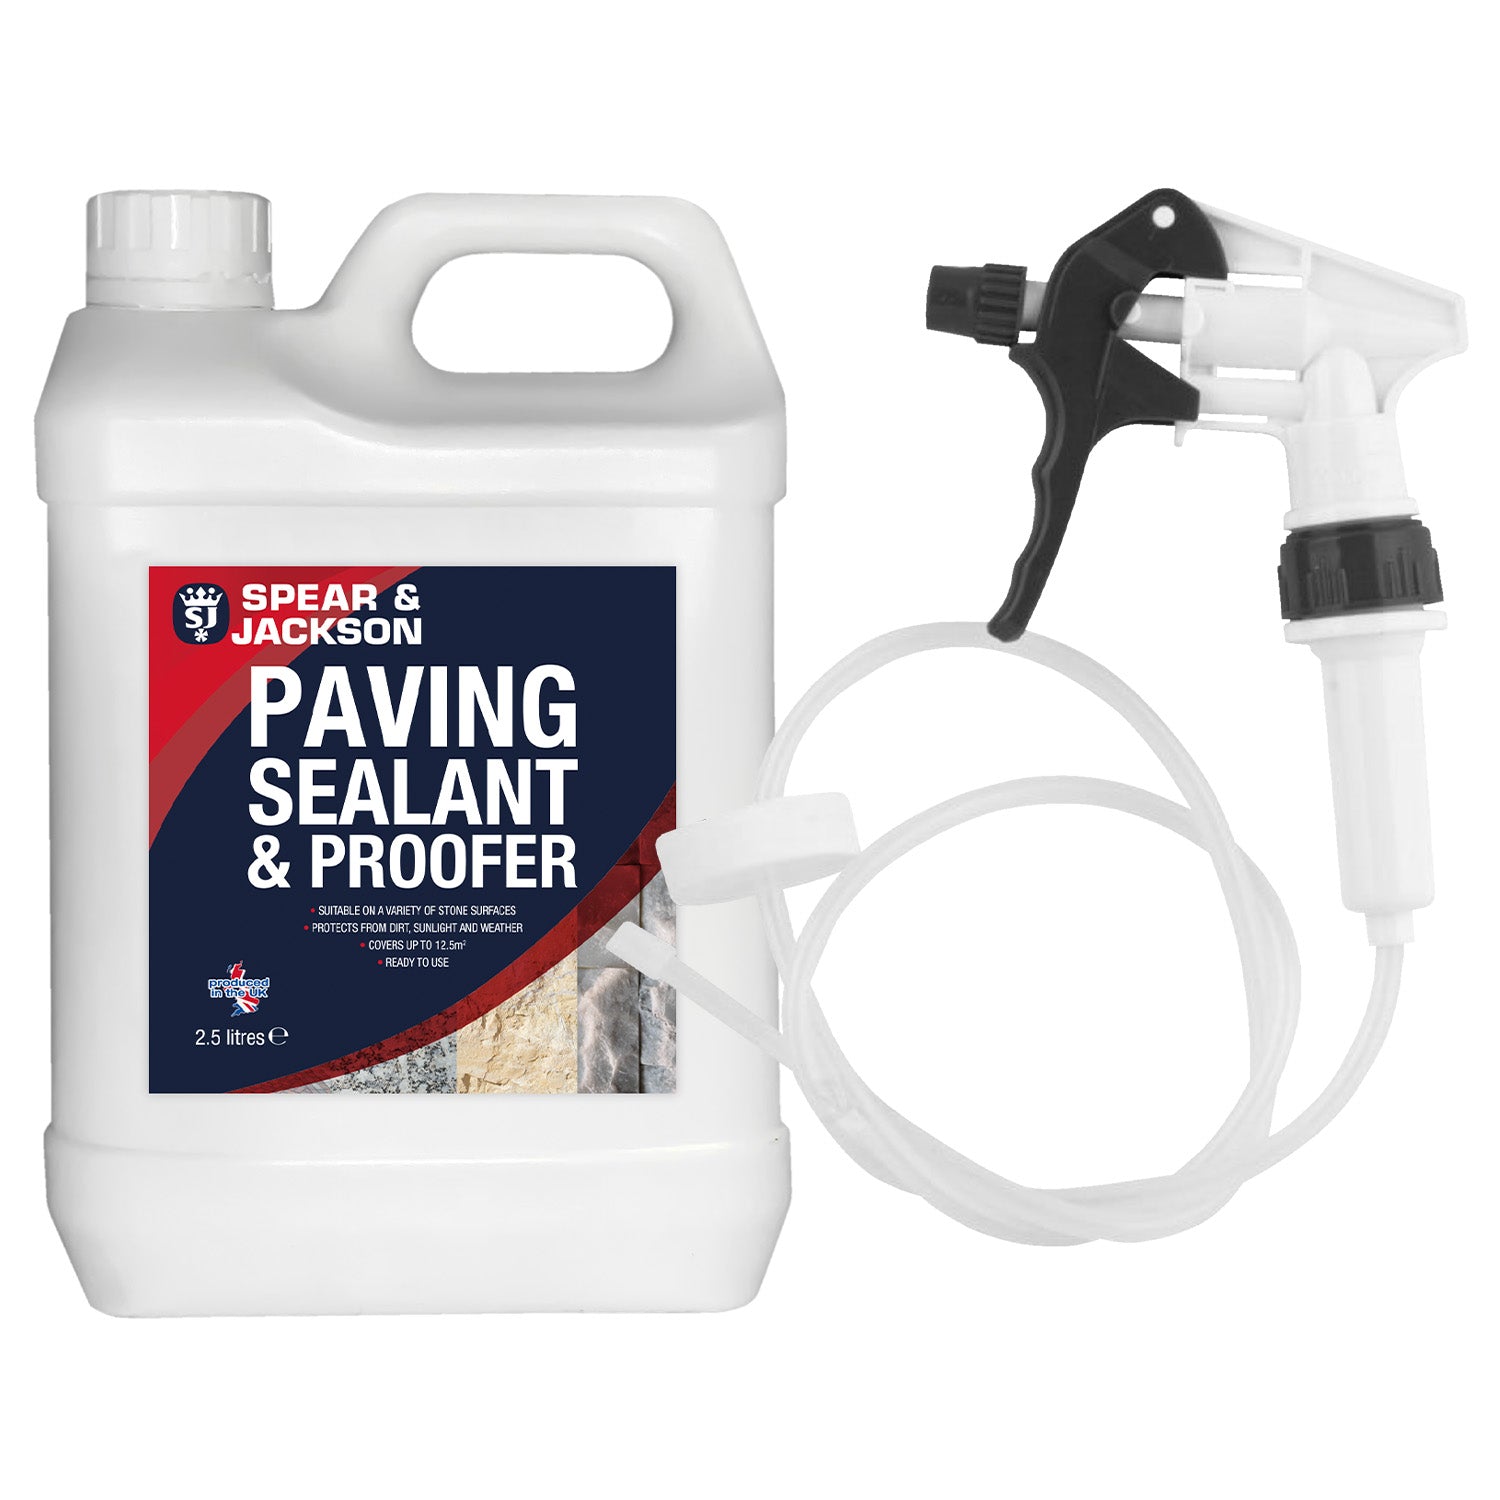 Paving Sealant and Proofer 2.5 Litre Water Seal Spear and Jackson with Long Hose Trigger